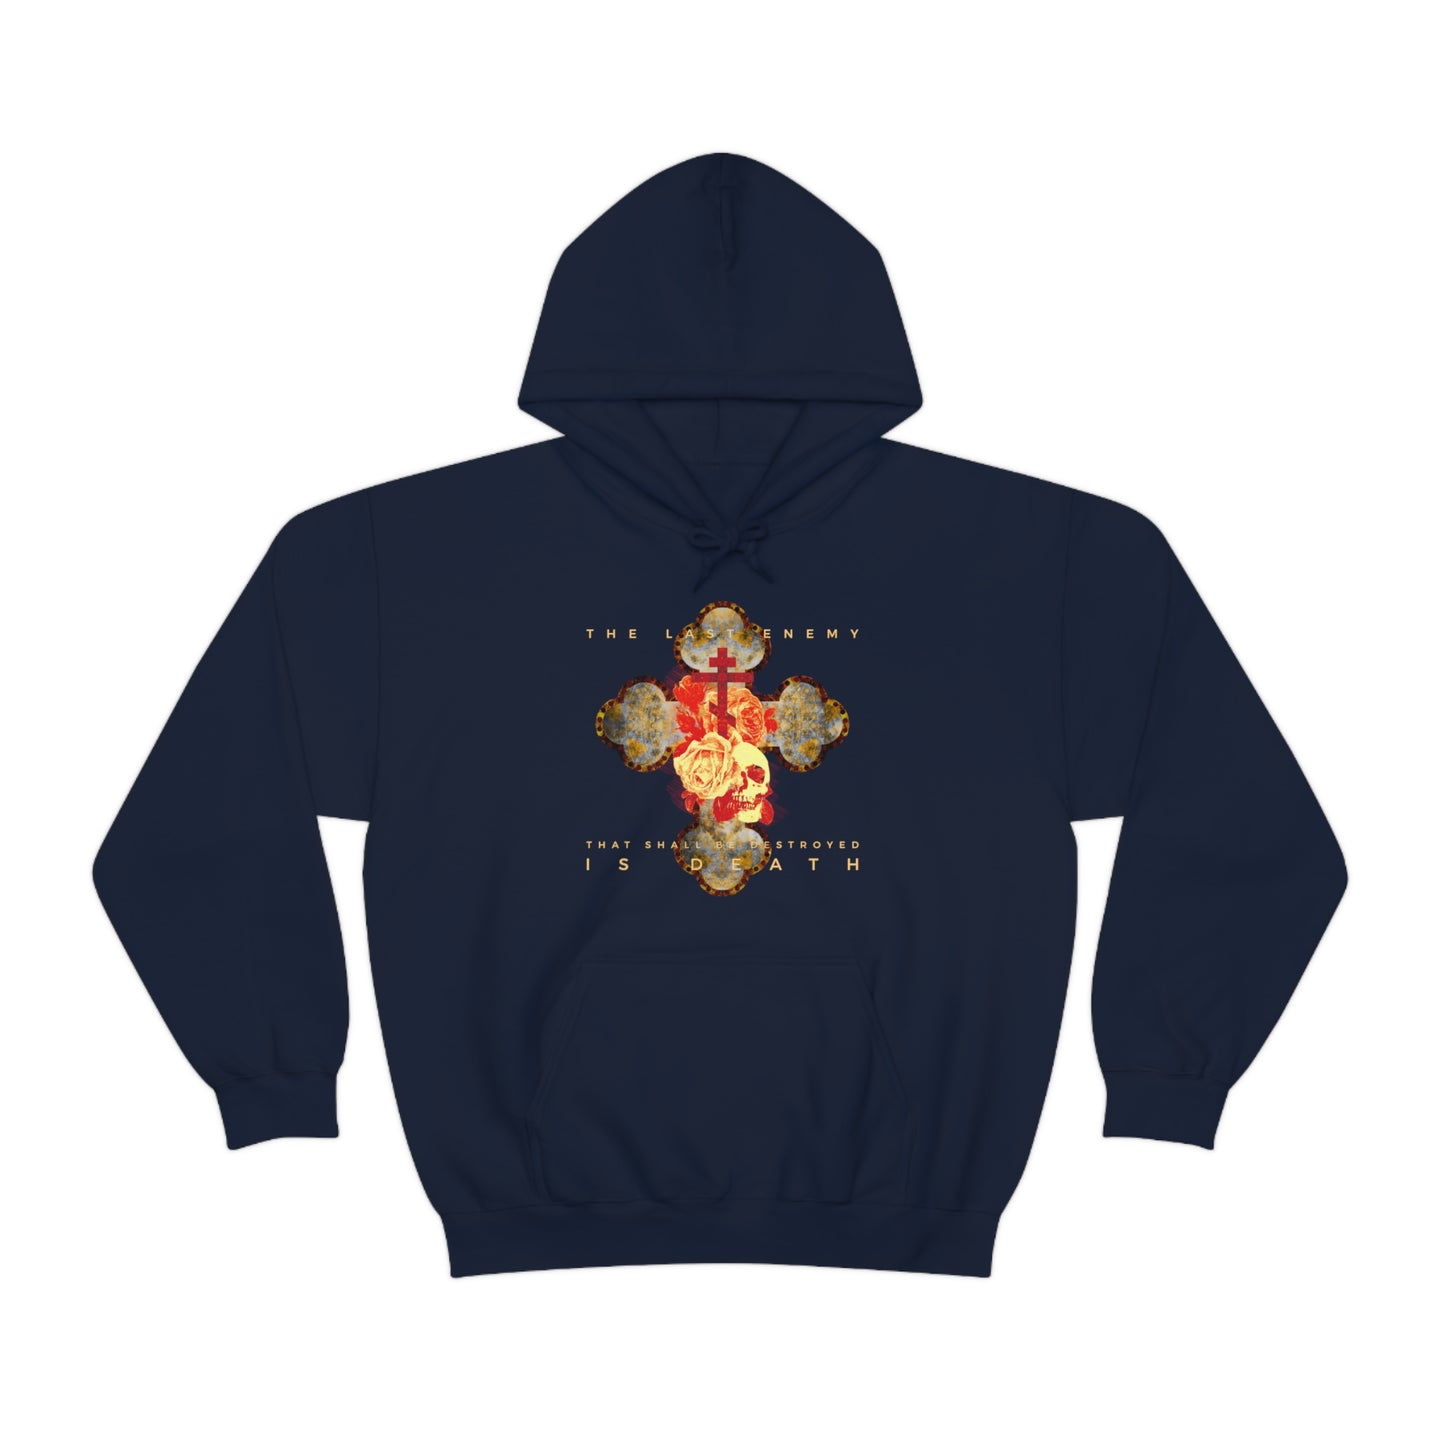 The Final Enemy That Shall Be Destroyed No.2 | Orthodox Christian Hoodie / Hooded Sweatshirt